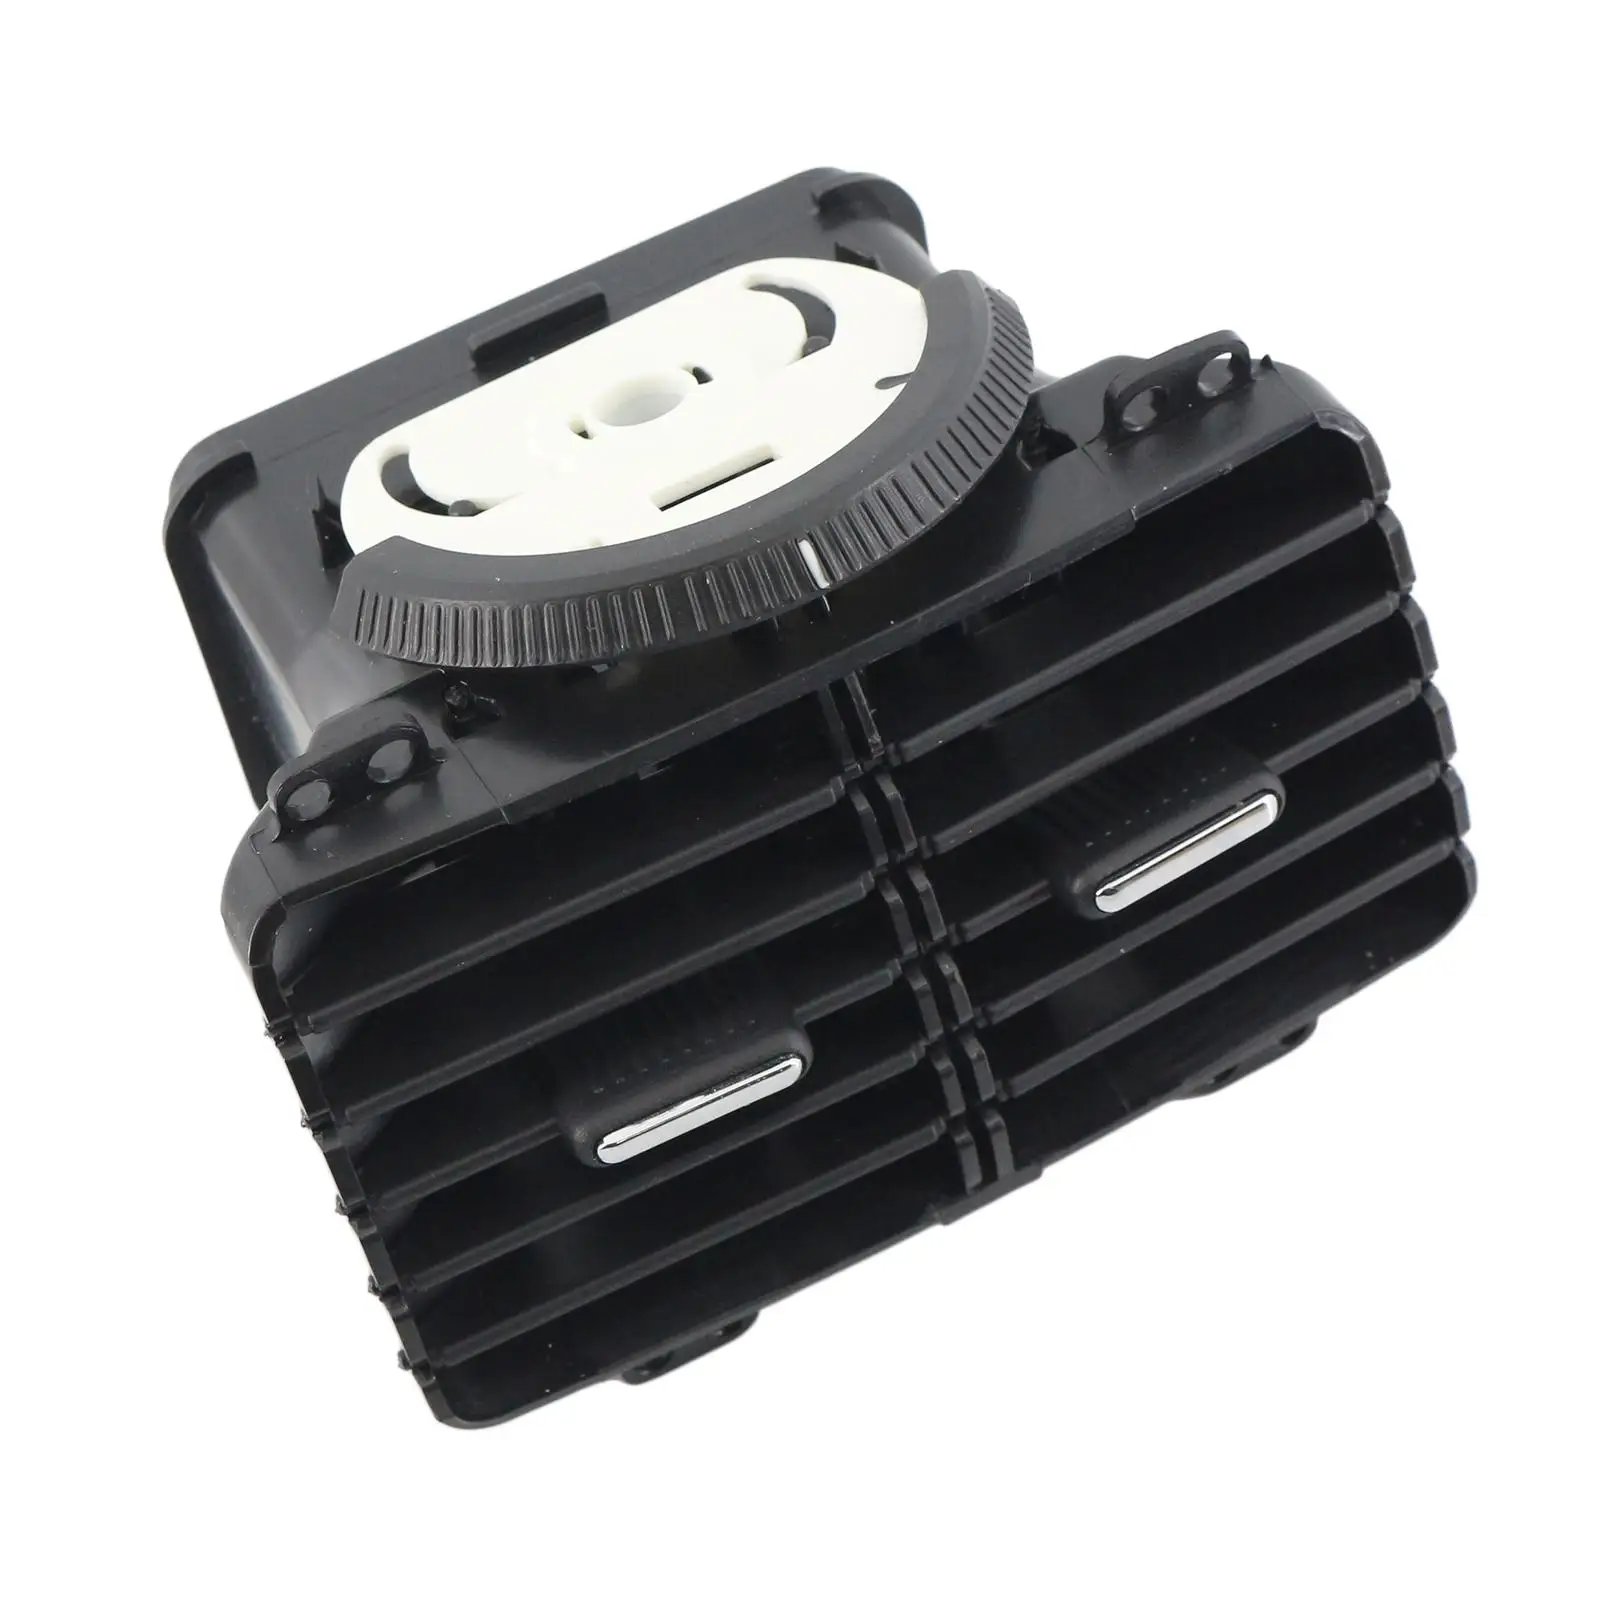 Vehicle Rear Air Outlet Vent Assembly 1K0819203A 1KD 819 203 for VW Golf MK5 MK6 Rabbit GTI Accessory Easy Installation